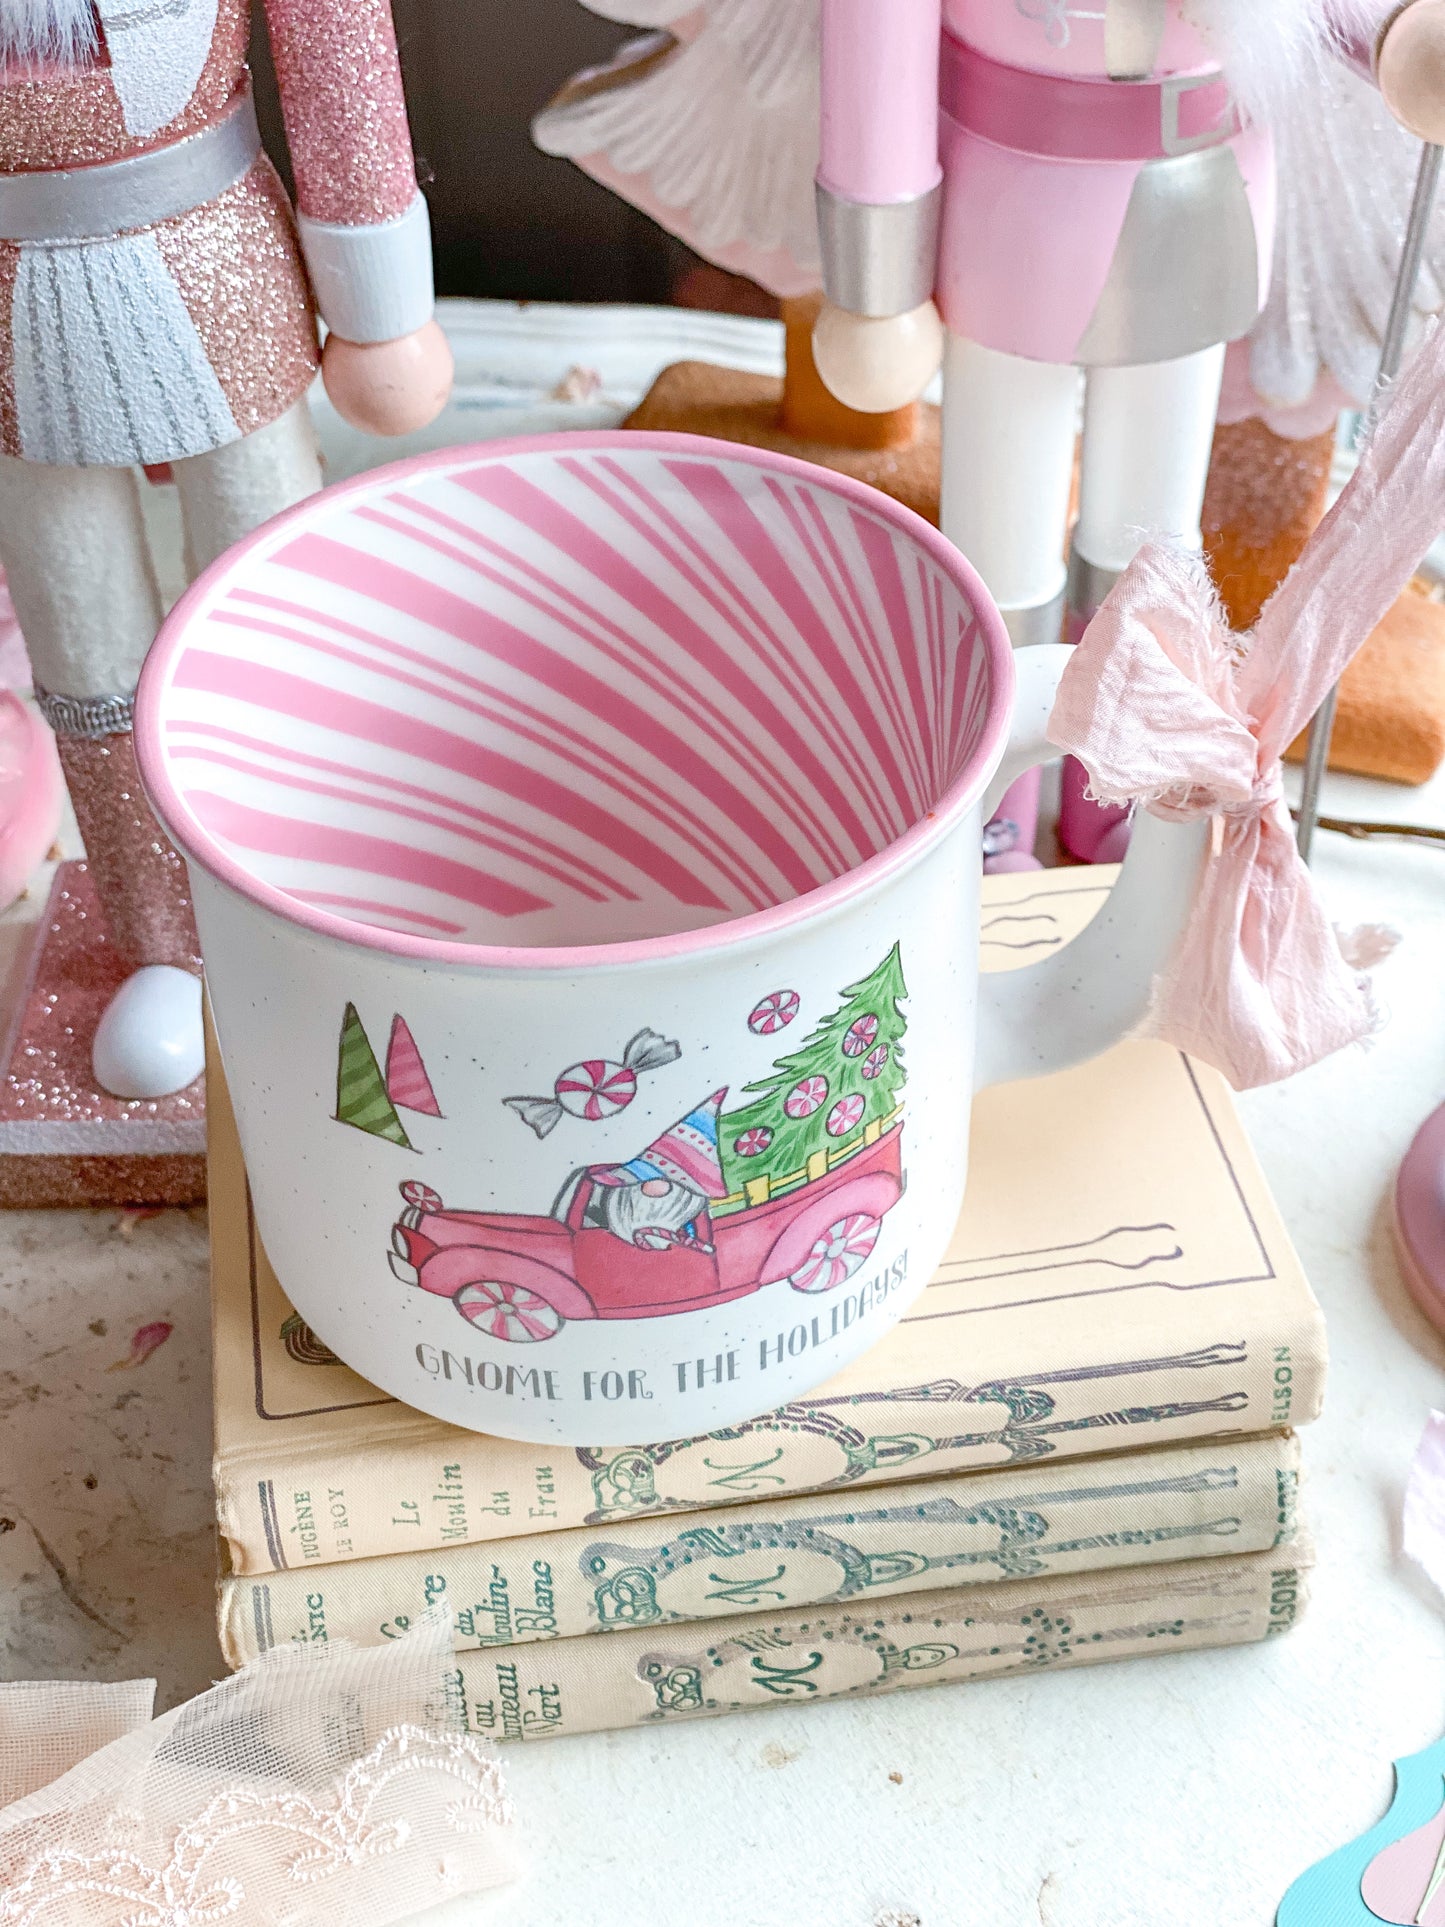 Pink Candy Cane Gnome for the Holidays Mug